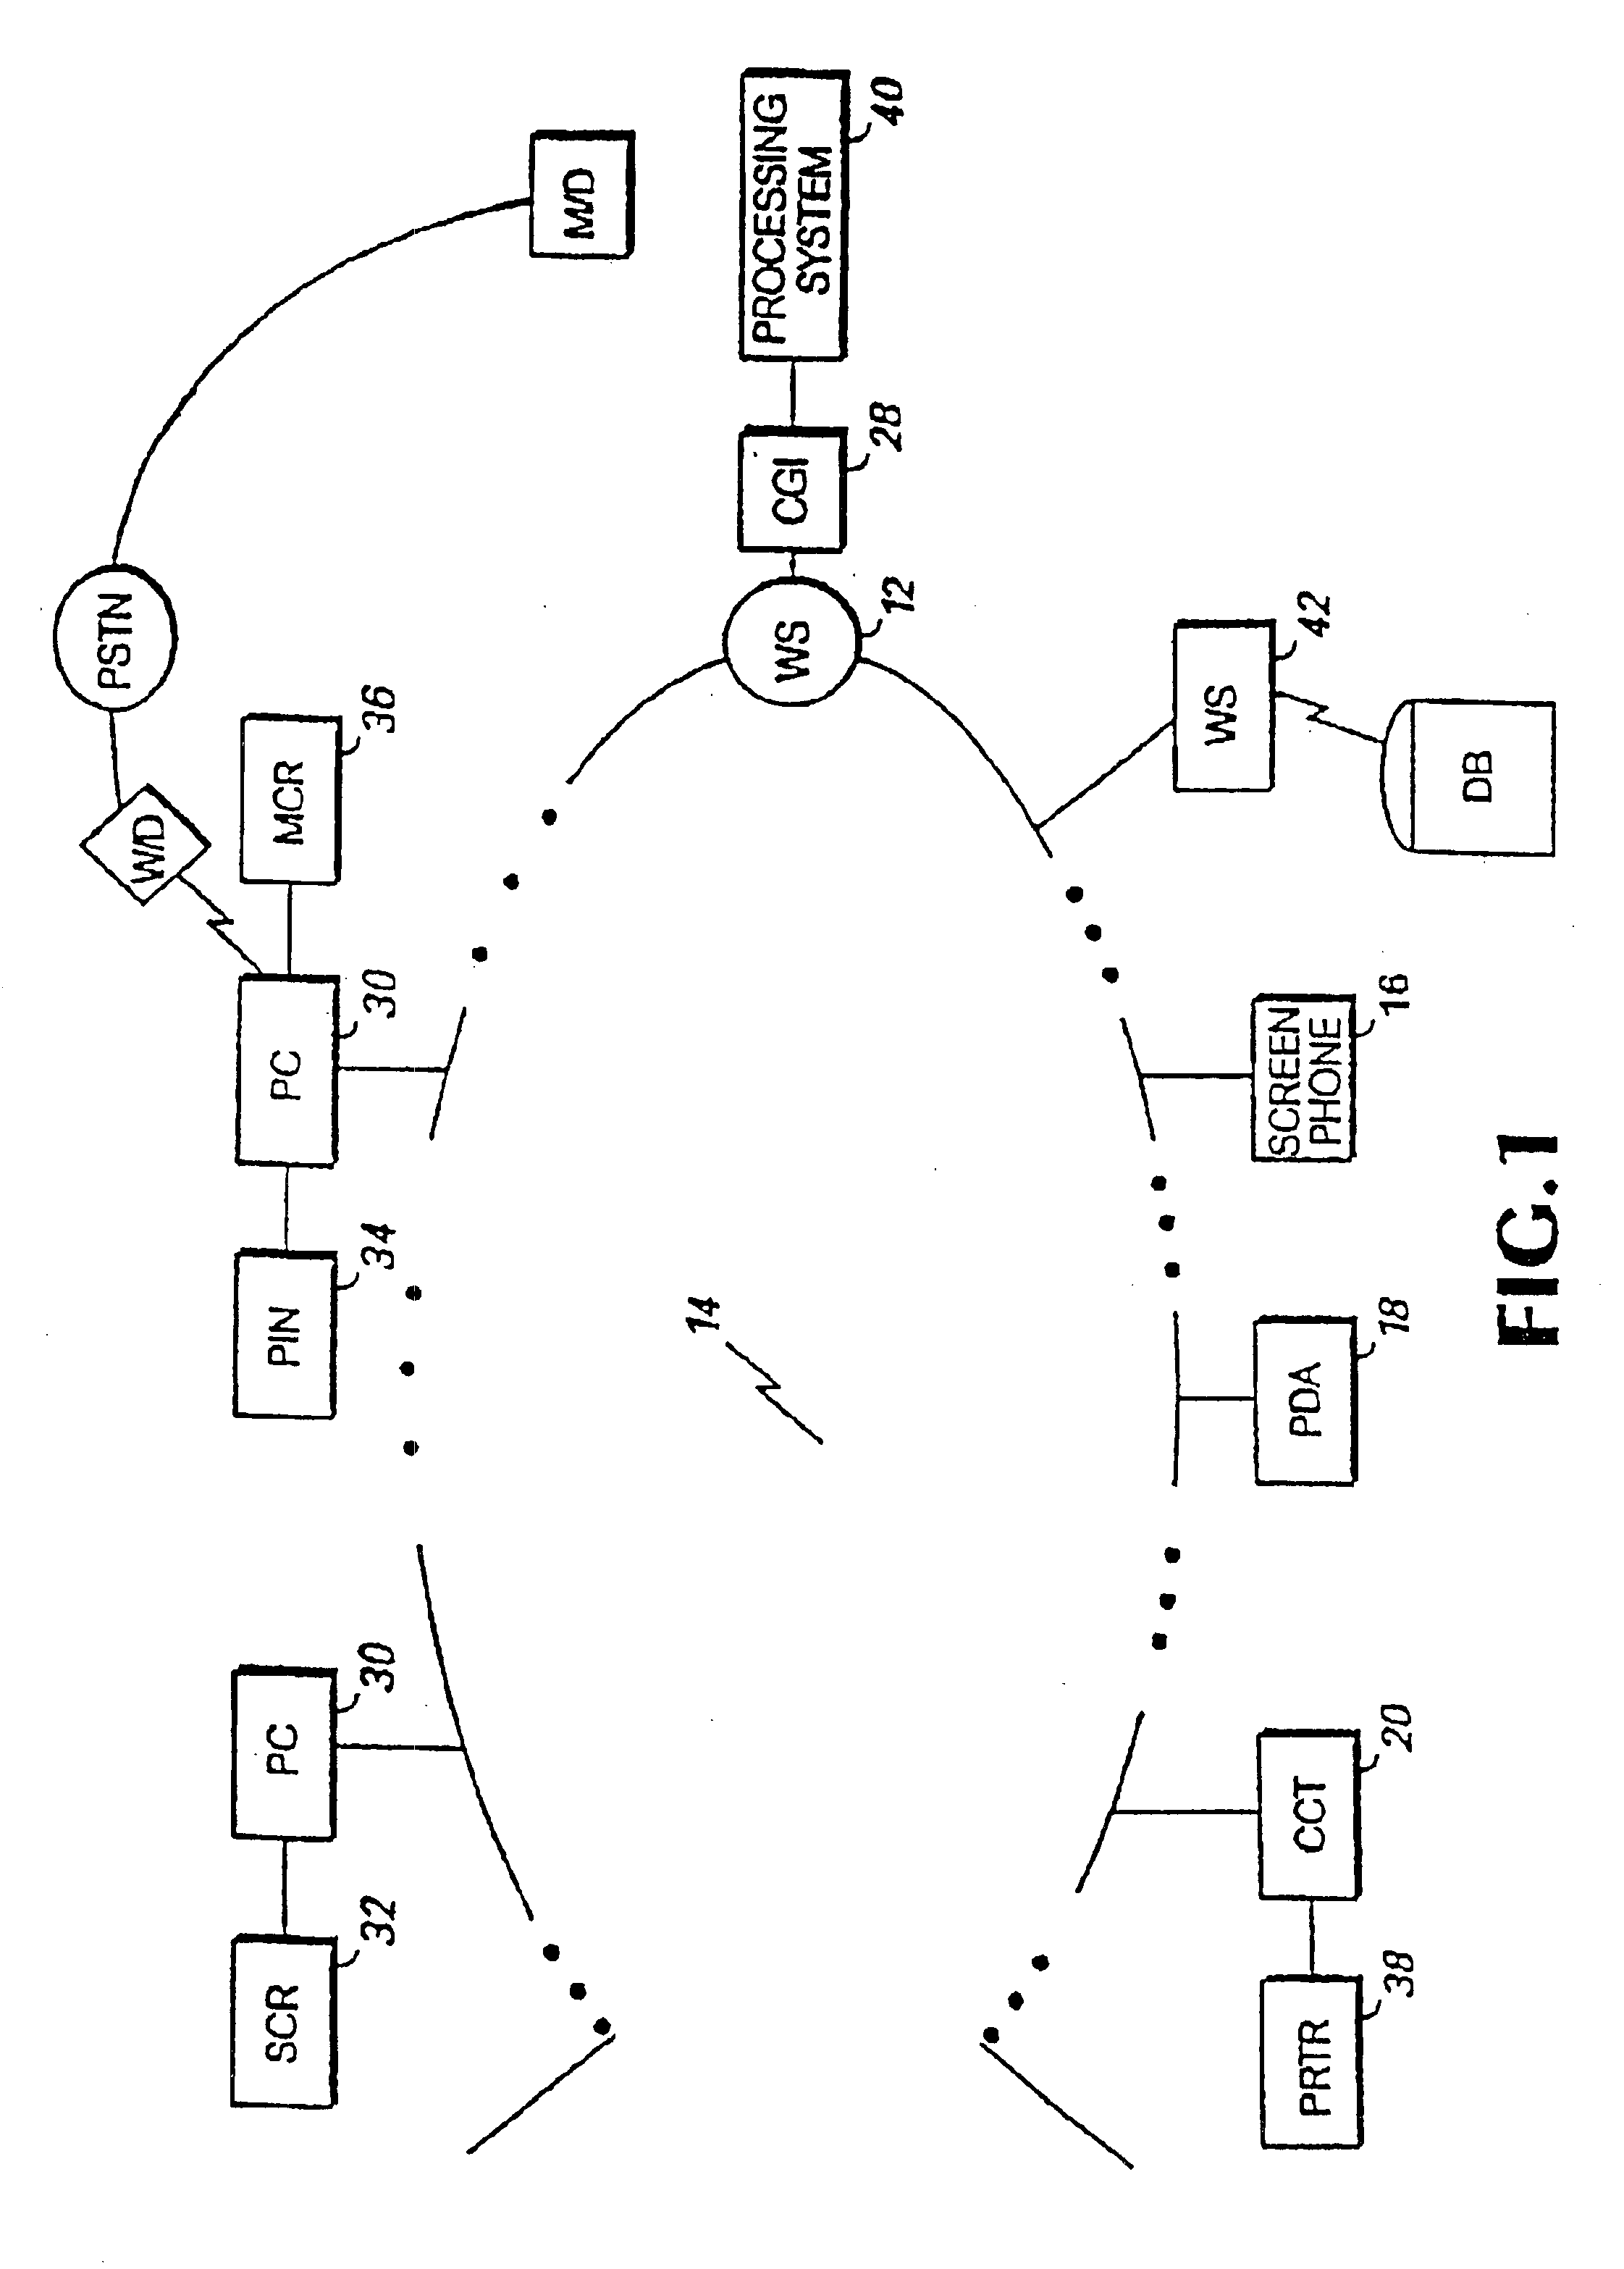 System and method for enabling transactions between a web server and an automated teller machine over the internet